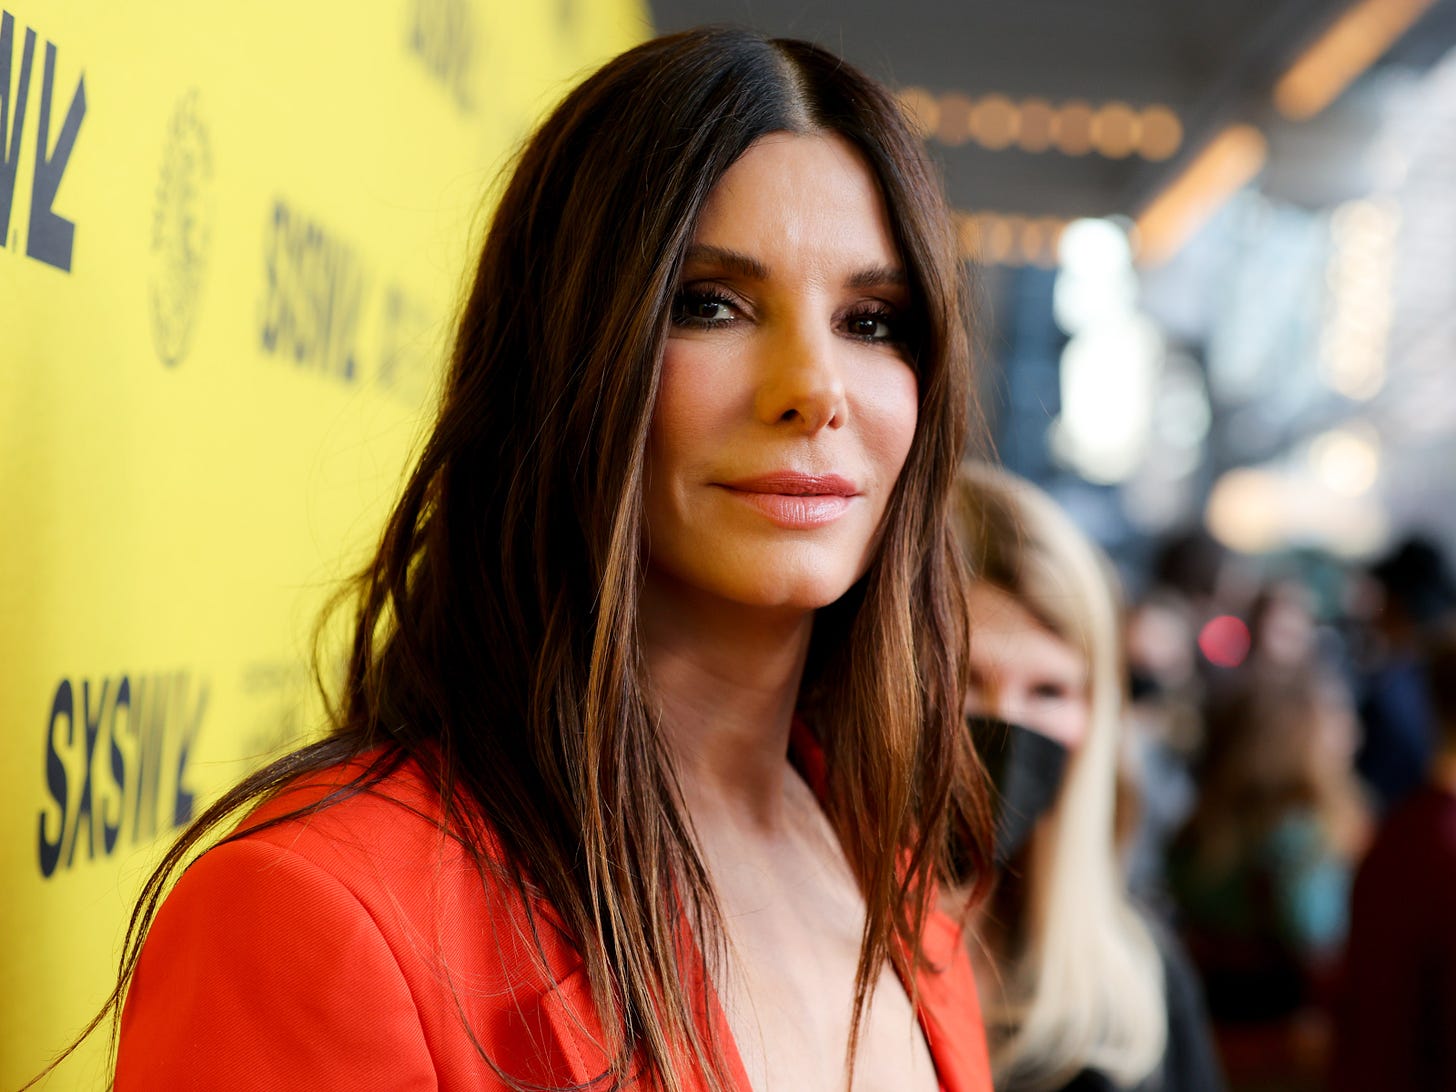 Sandra Bullock Hits the Town With Jennifer Aniston in a Rare Sighting |  Glamour